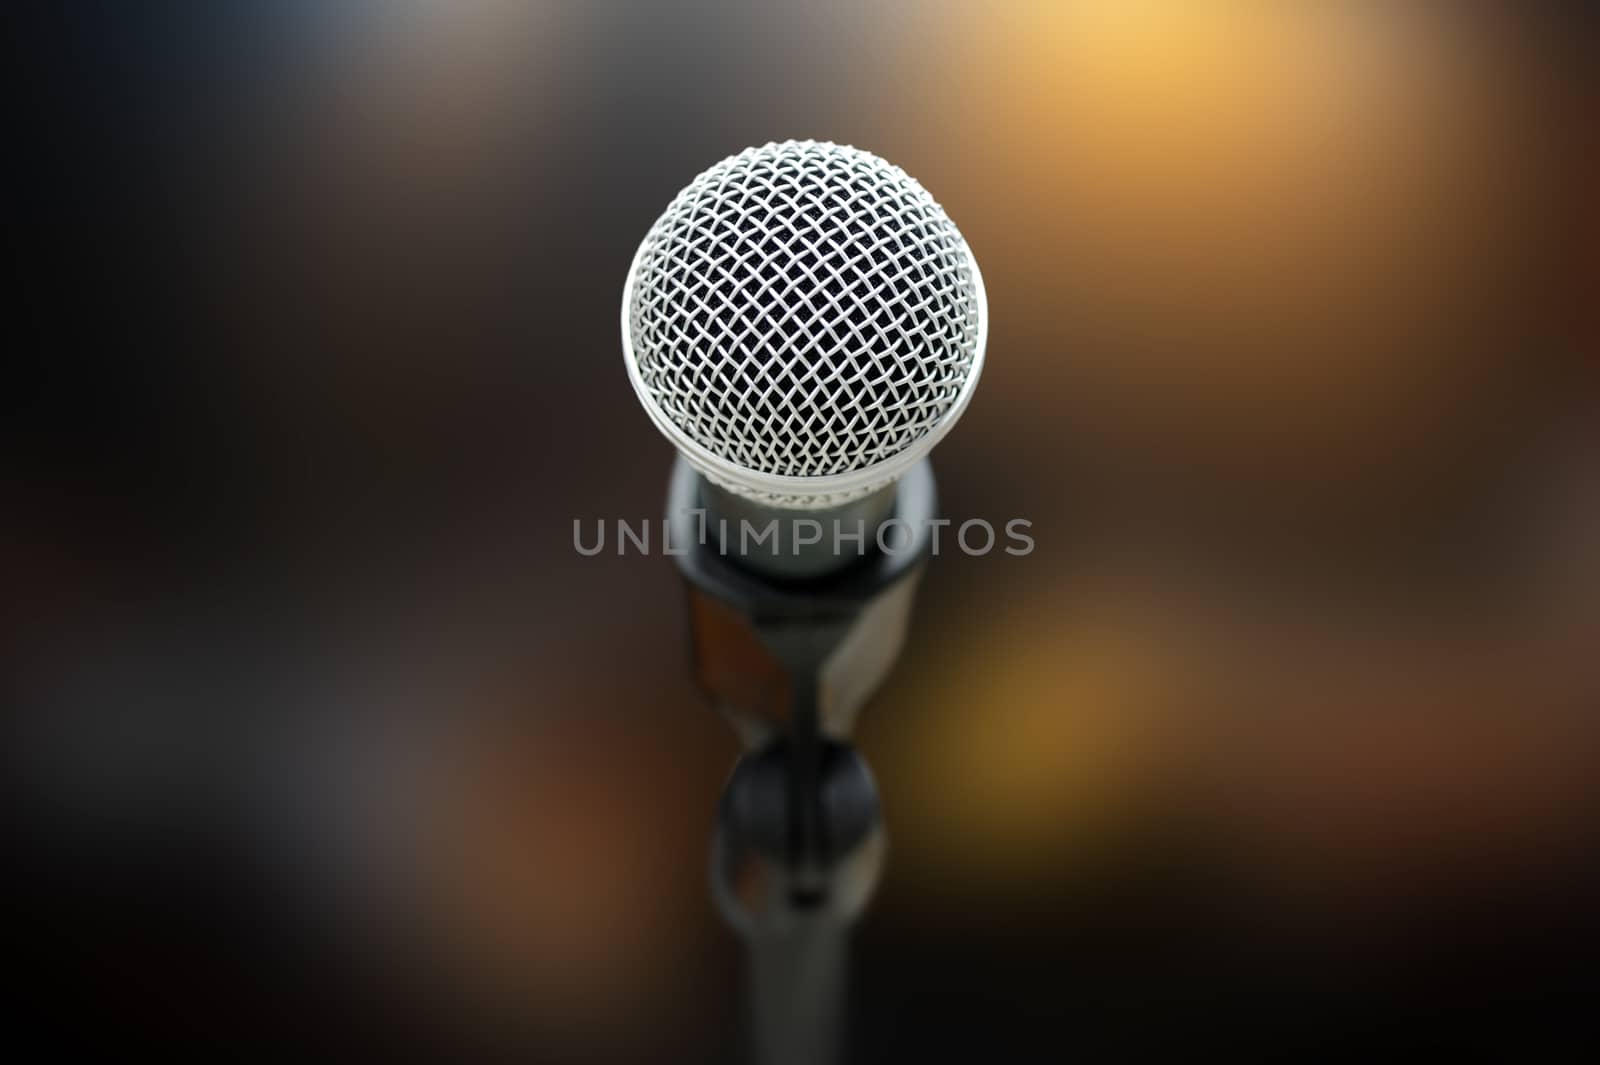 Close-up of microphone in concert hall or conference room